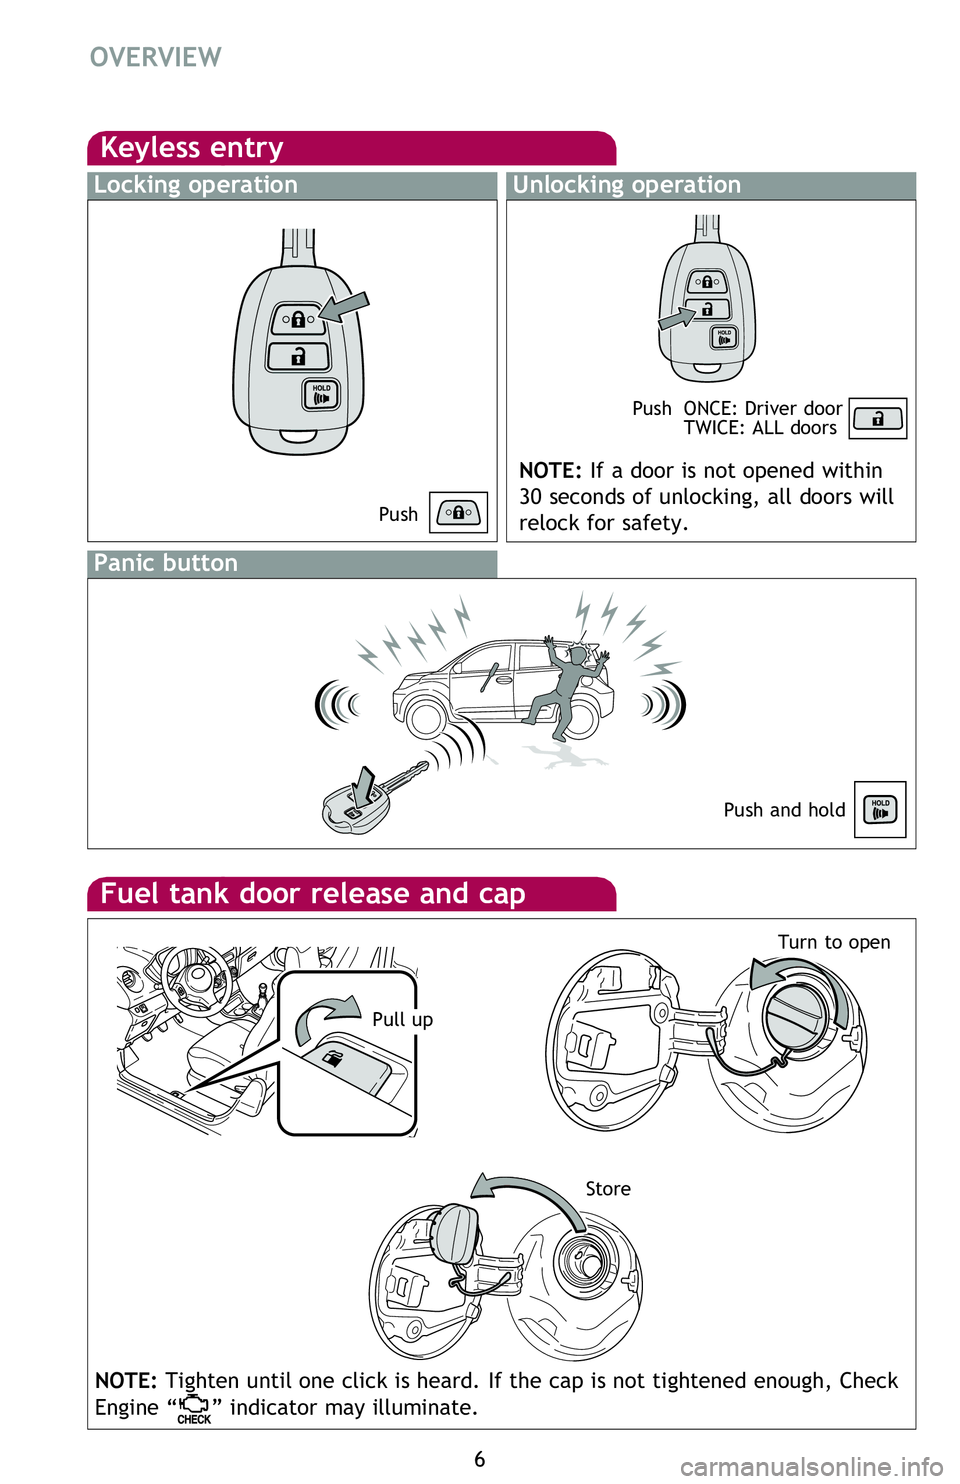 TOYOTA xB 2013  Owners Manual (in English) 6
OVERVIEW
Fuel tank door release and cap
StoreTurn to open
Keyless entry
Locking operationUnlocking operation
NOTE: If a door is not opened within 
30 seconds of unlocking, all doors will 
relock for